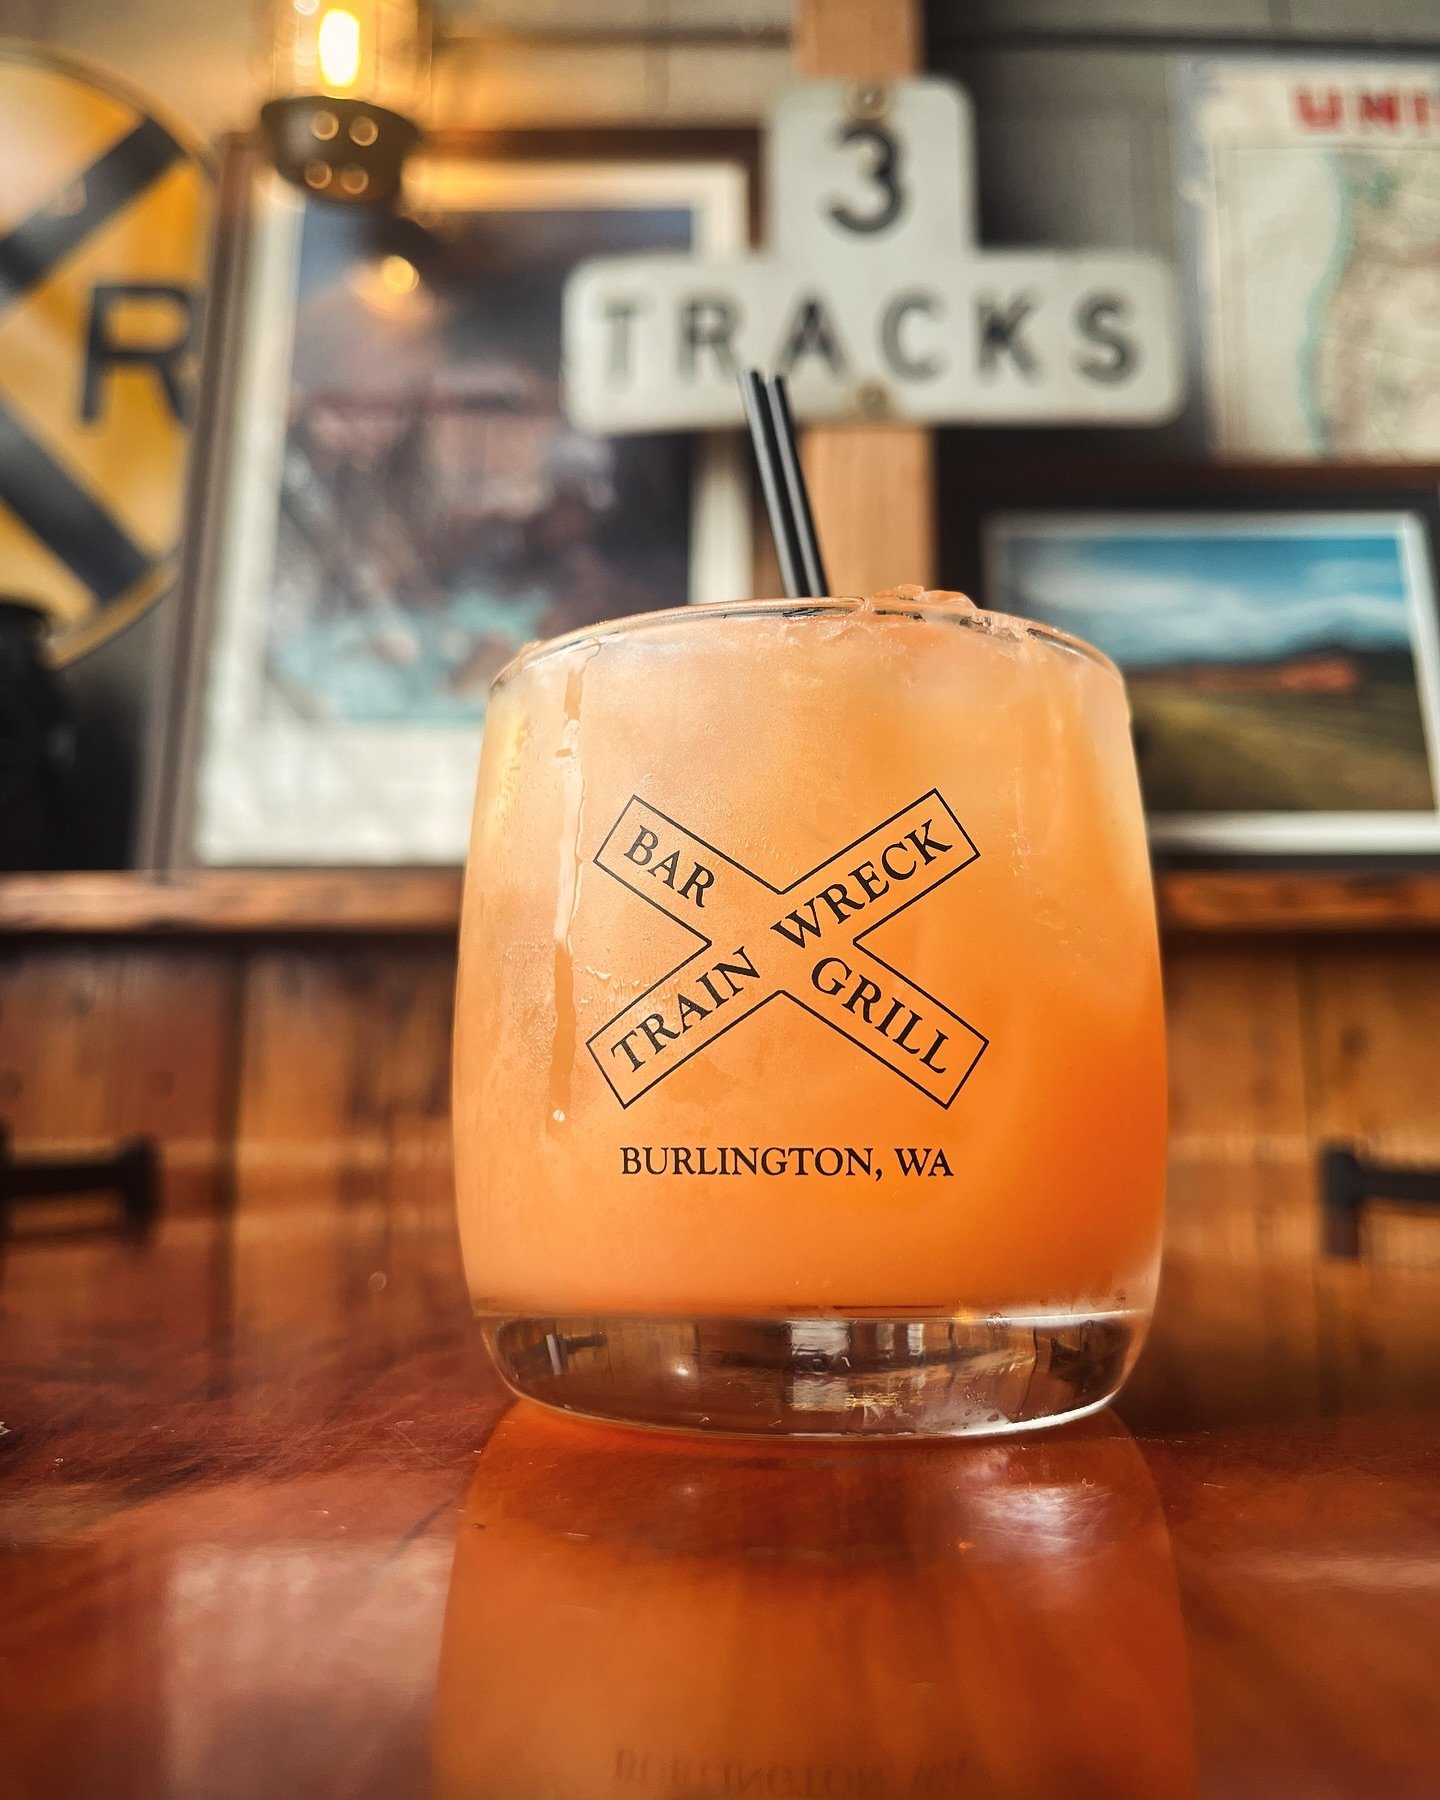 Our #whiskeytuesday special is a Sip of Passion&mdash;Tullamore Dew, guava pur&eacute;e, passion fruit syrup, lemon, and a splash of sour. $11 all day at Train Wreck!